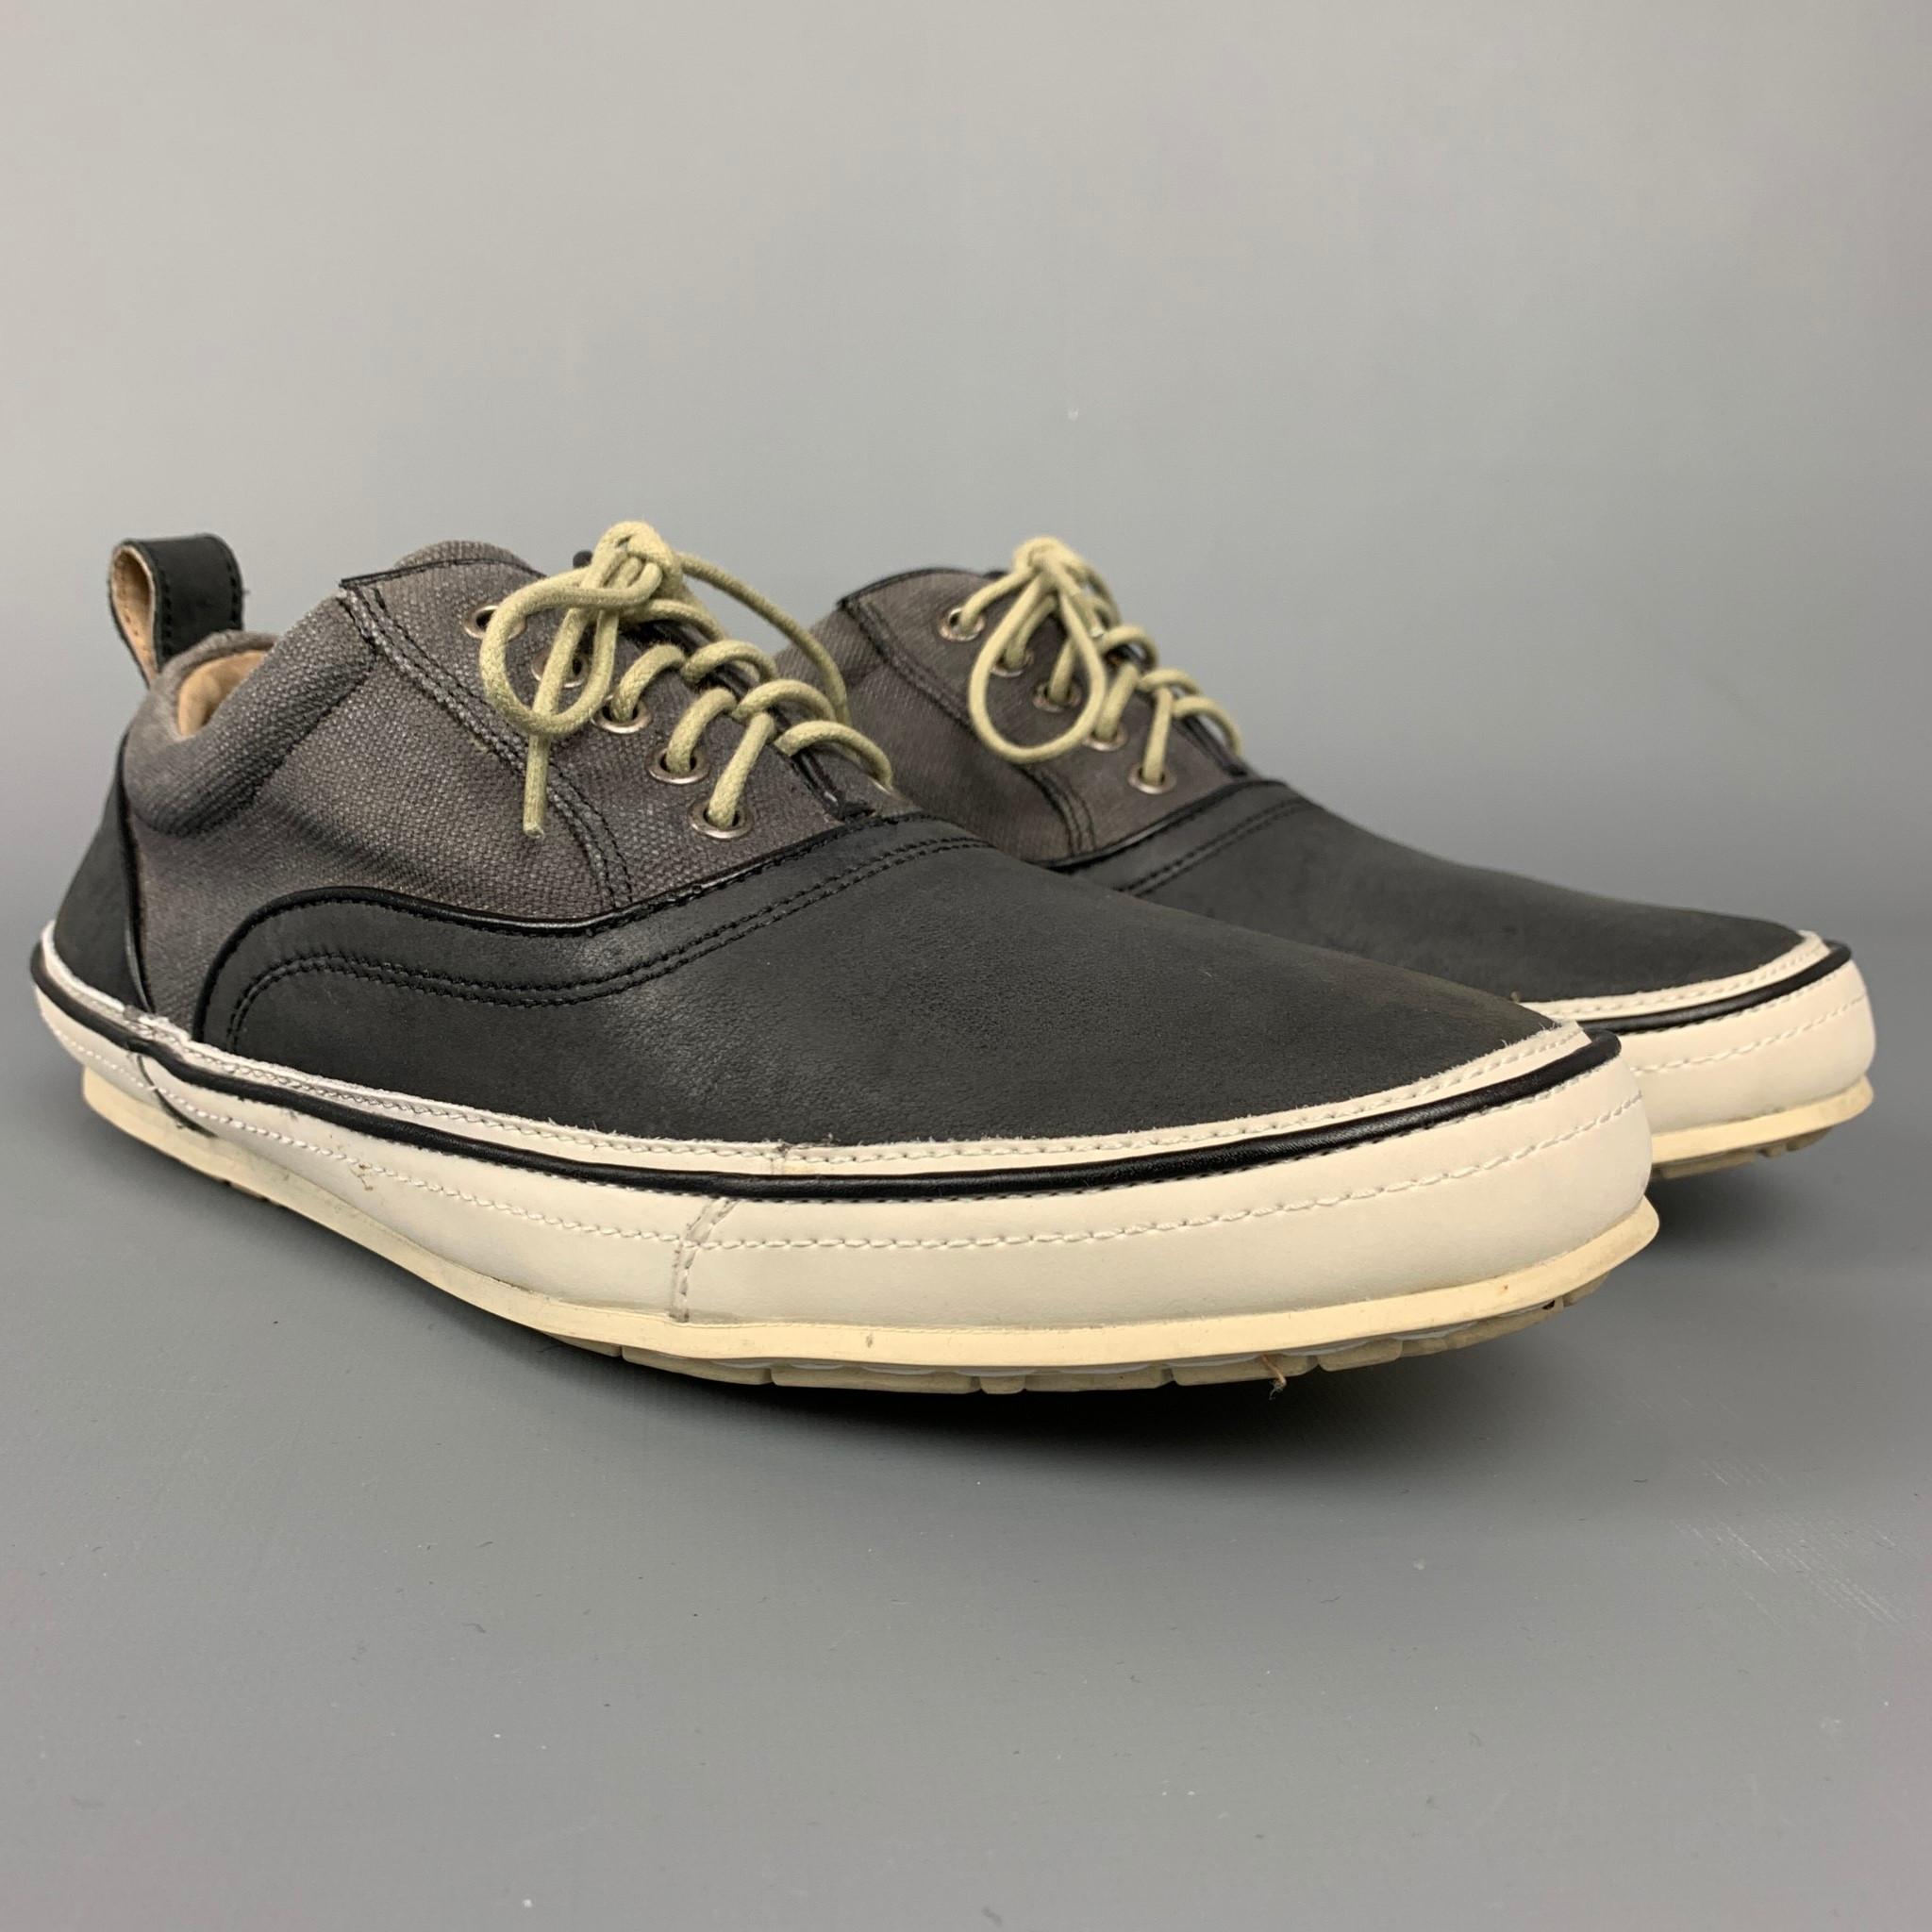 JOHN VARVATOS sneakers comes in a grey two toned canvas featuring a rubber sole and a lace up closure. Comes with green laces. 

Good Pre-Owned Condition.
Marked: 8 M

Outsole: 3.5 in. x 10.5 in. 